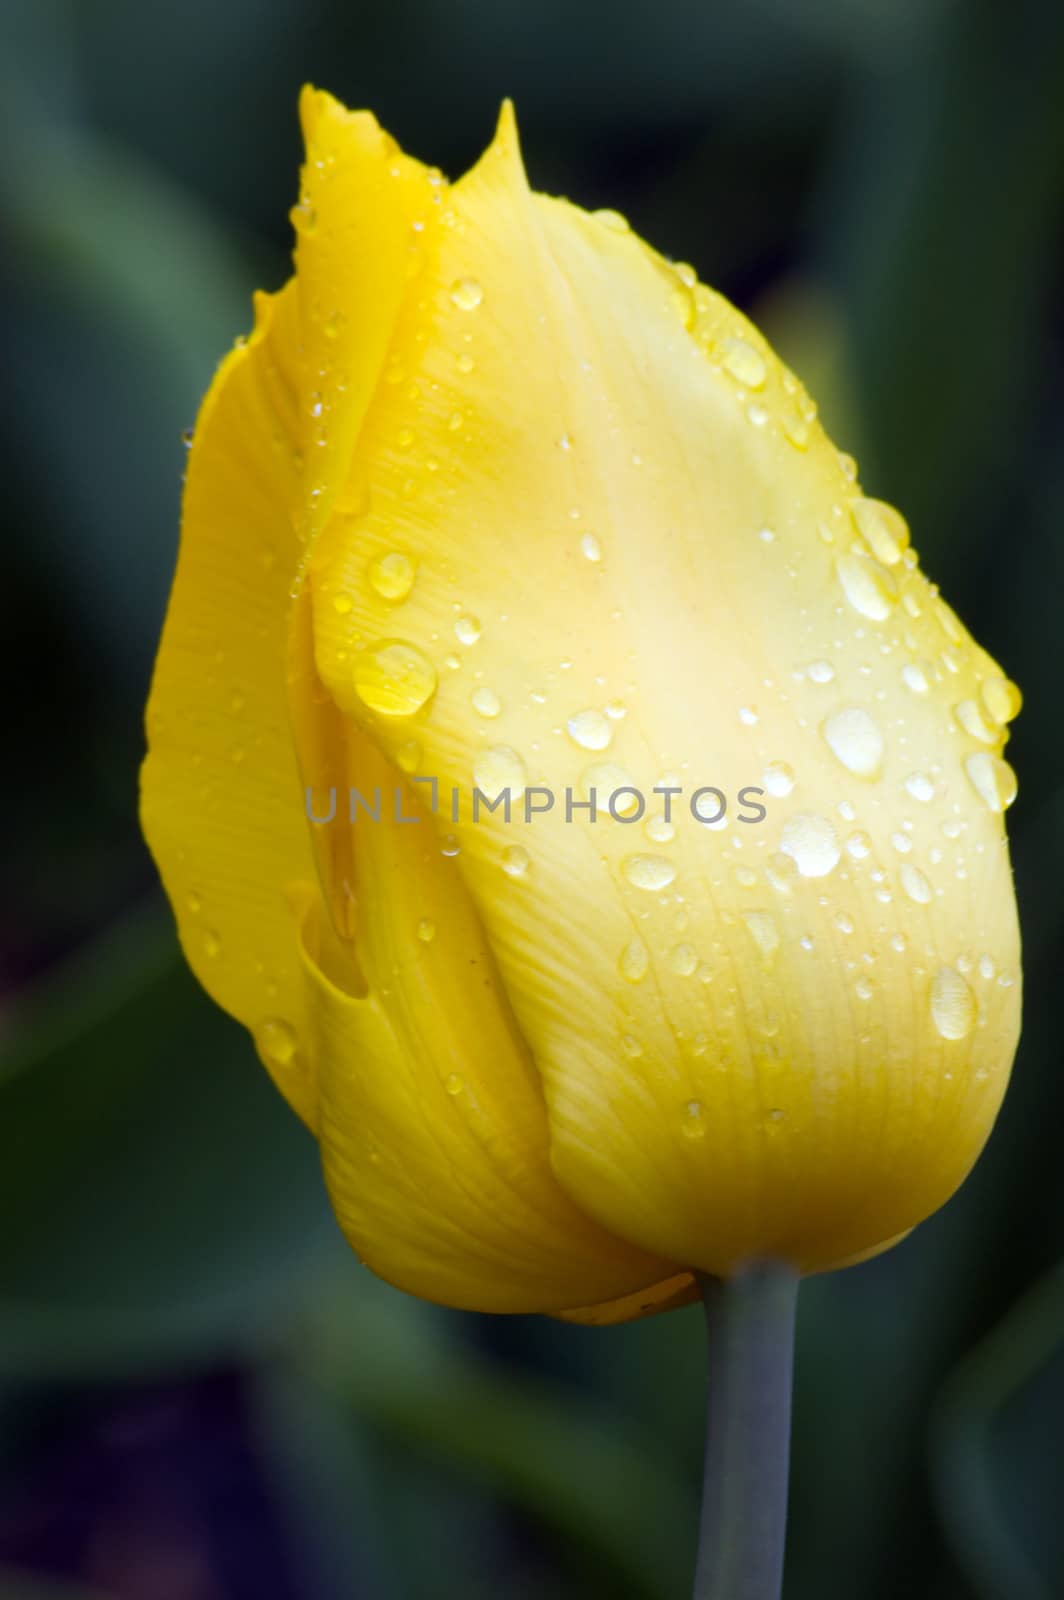 yellow tulip by PavelS